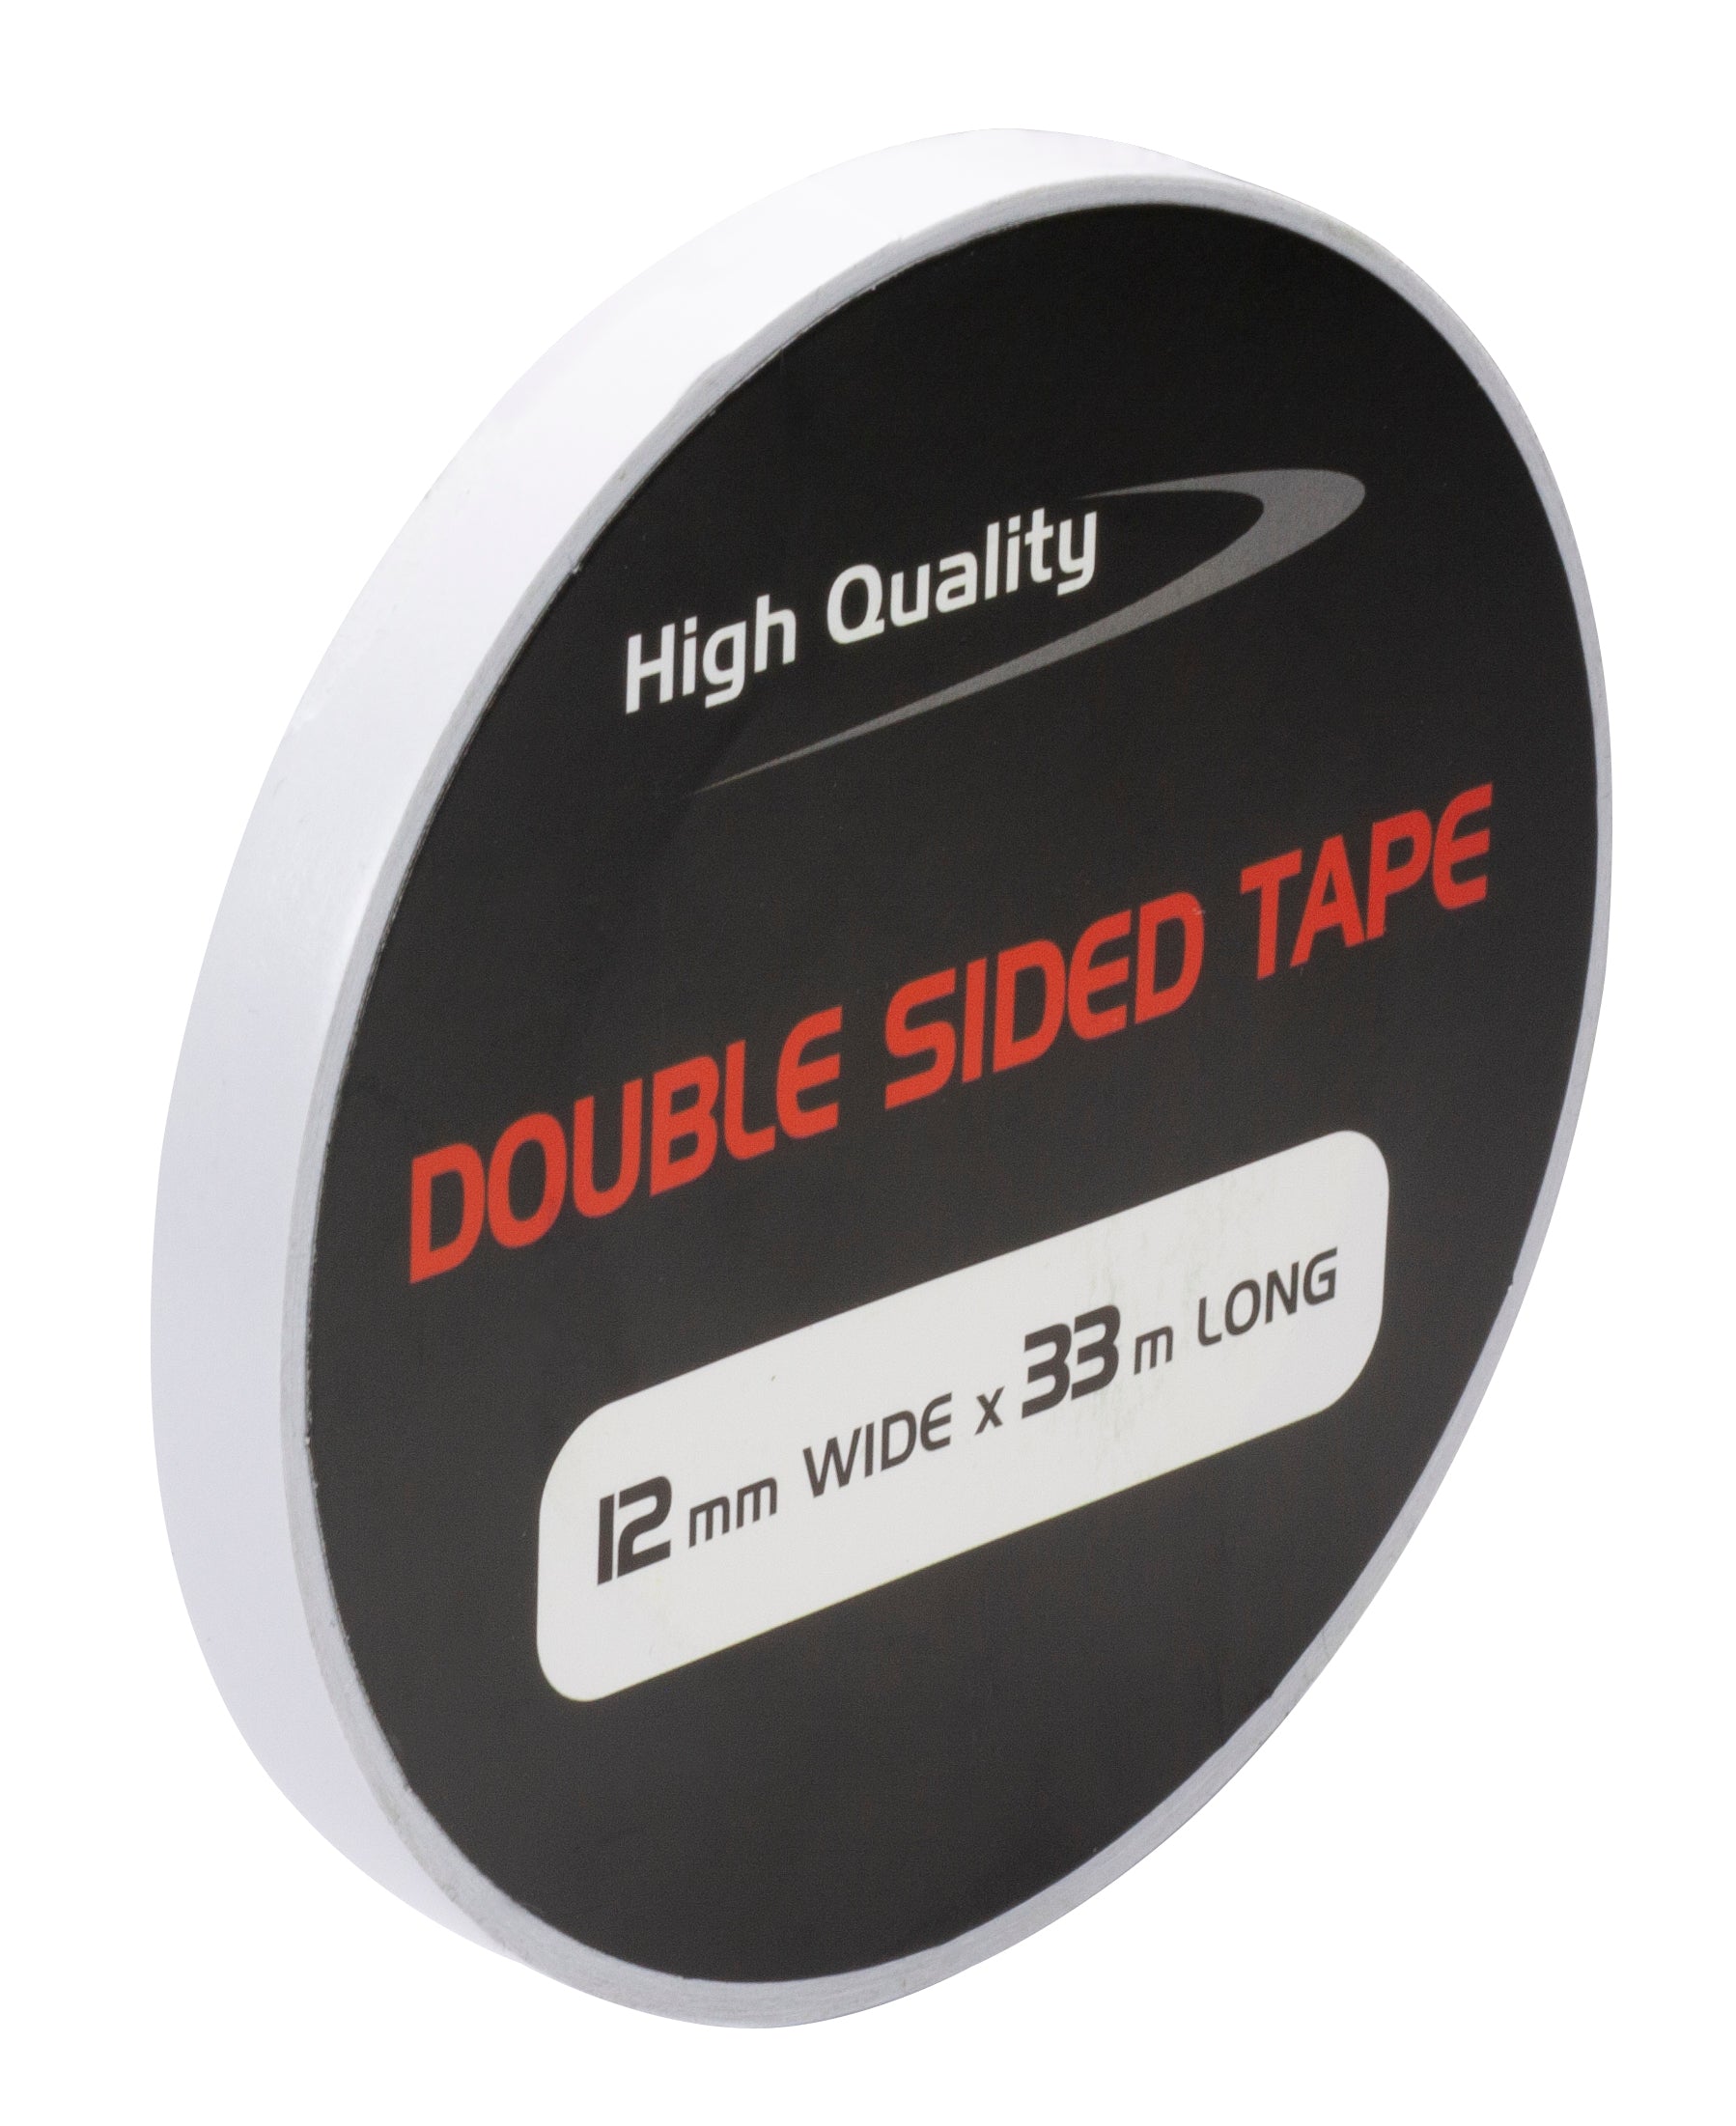 Double Sided Tape WHITE 12mm x 33m x 0.16mm Thickness - Per Pack